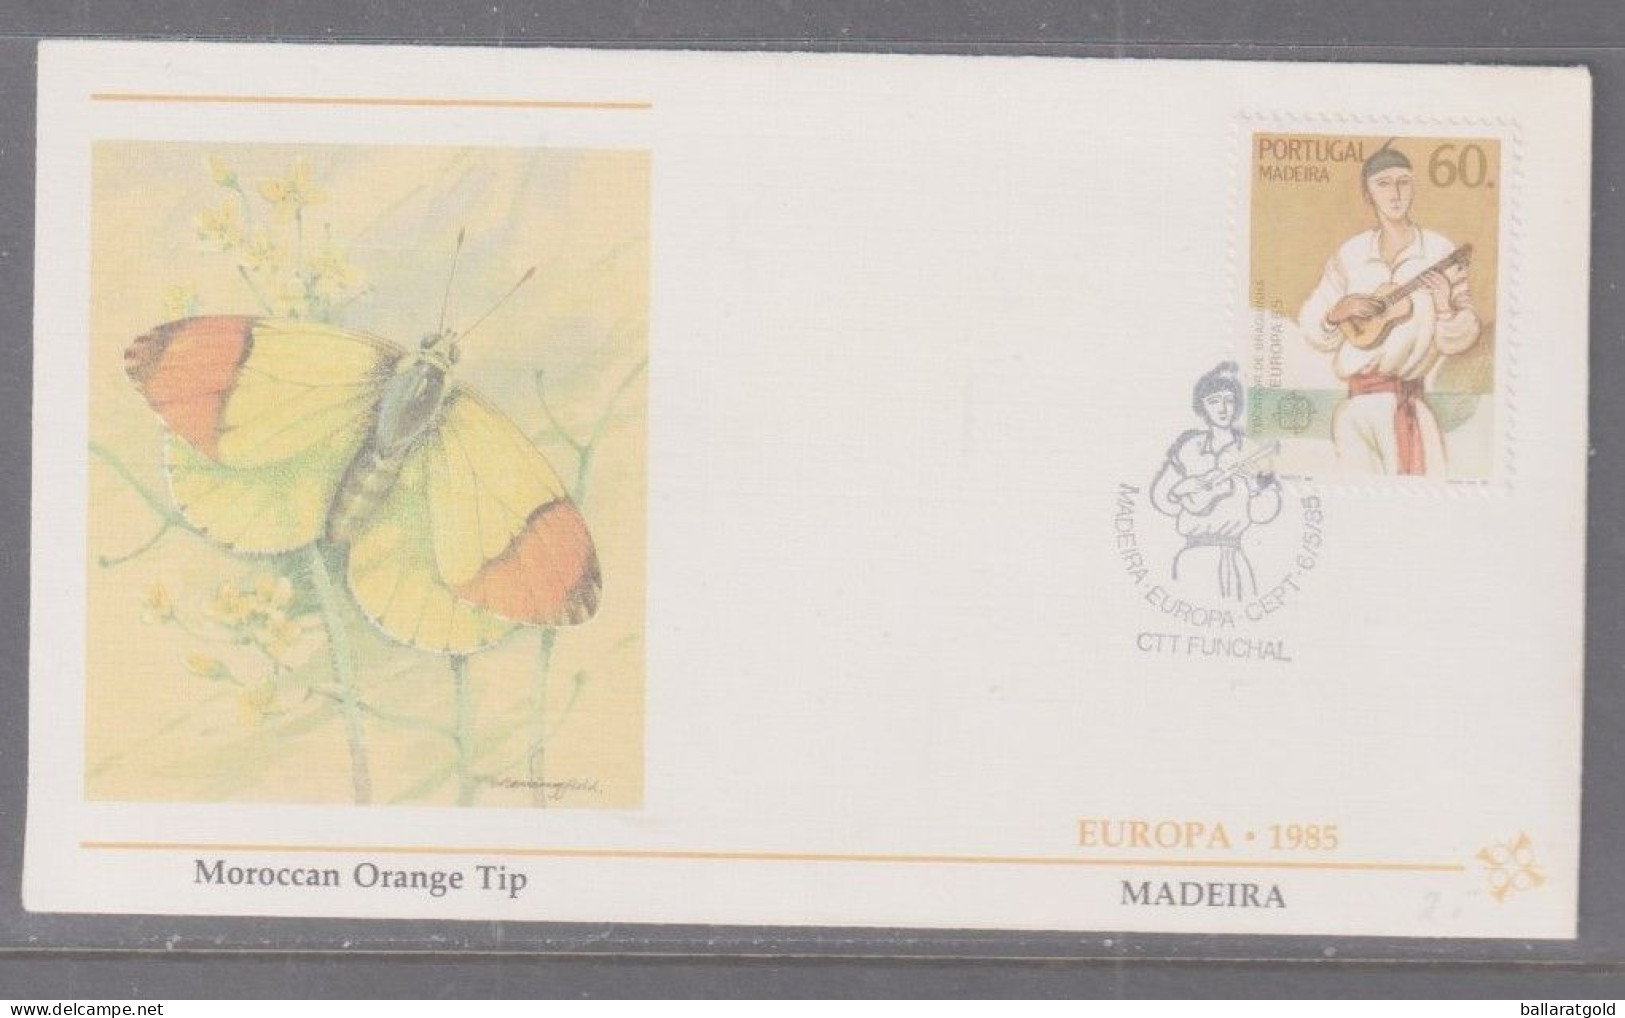 Portugal Madeira 1985 Europa - Traditional Costumes First Day Cover - Covers & Documents